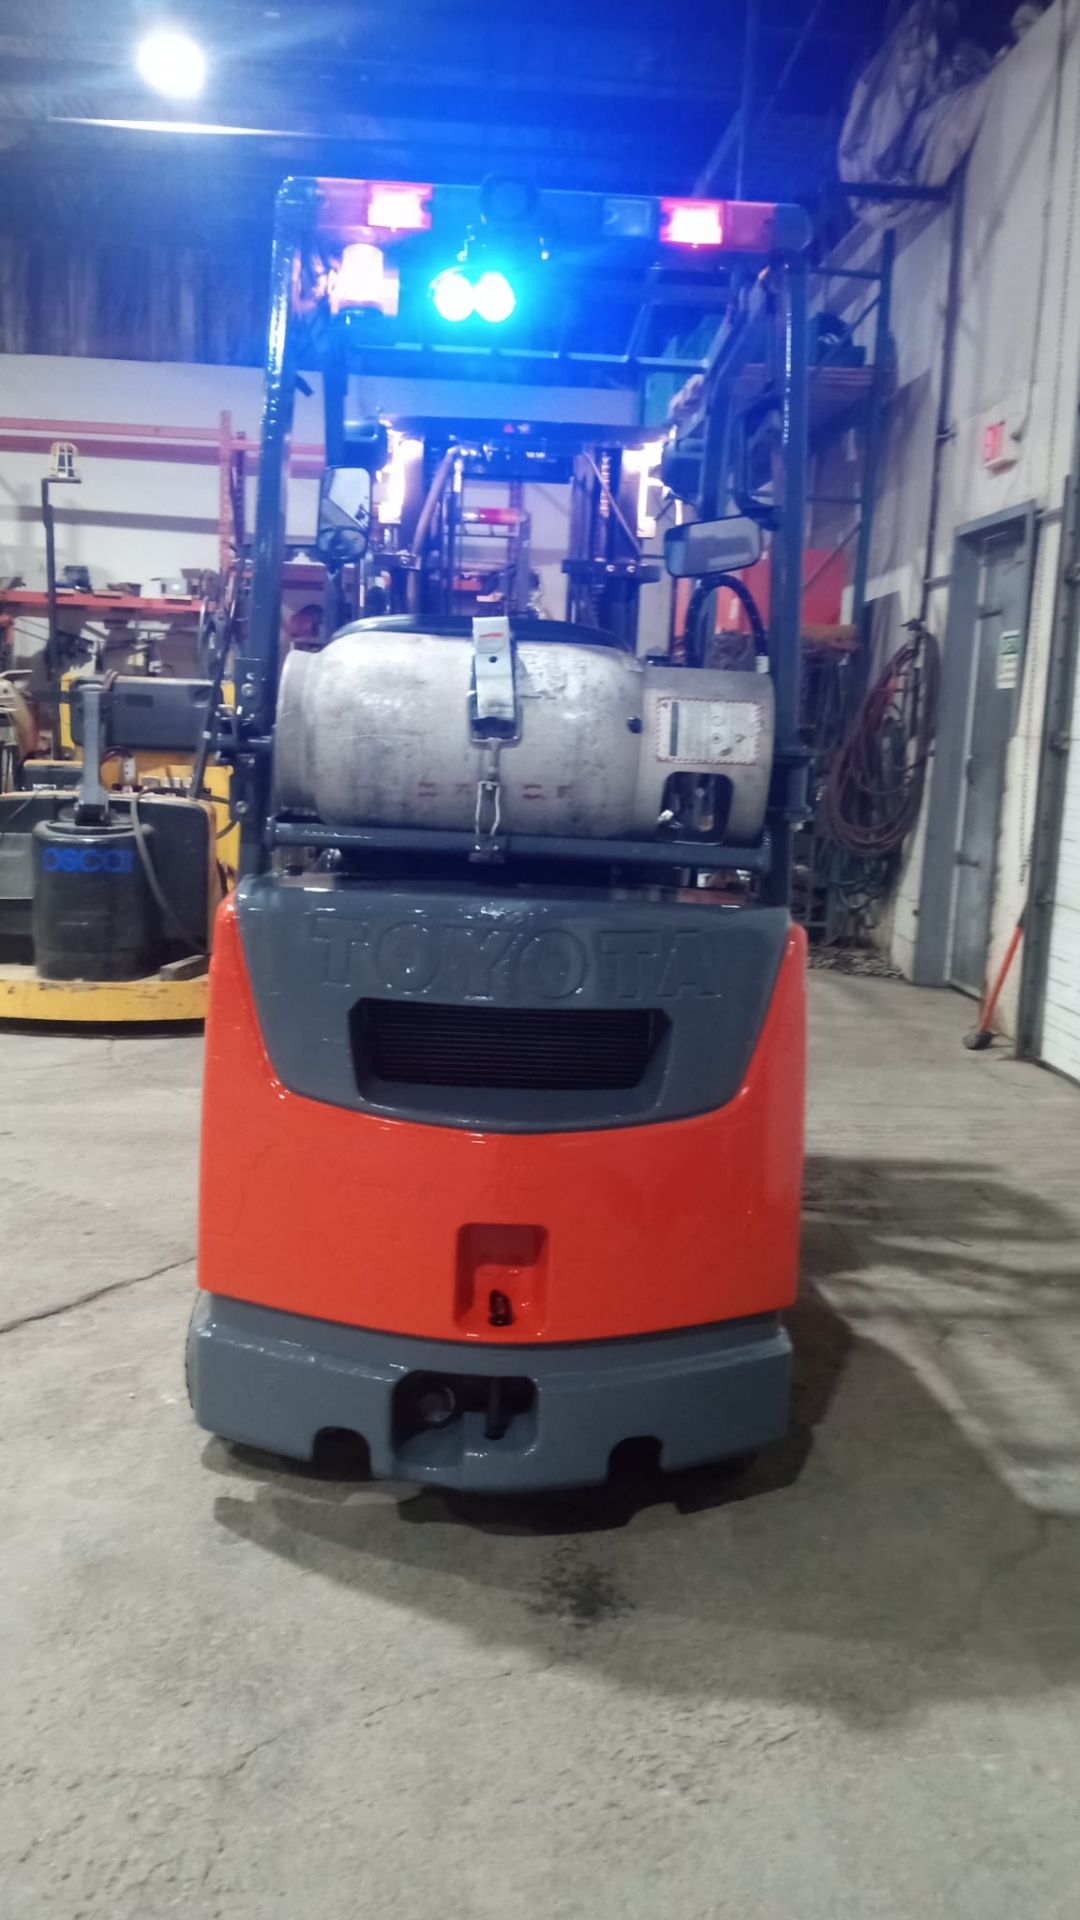 2018 TOYOTA 3,000lbs Capacity LPG (Propane) Forklift with sideshift and 3-STAGE MAST (no propane - Image 5 of 6